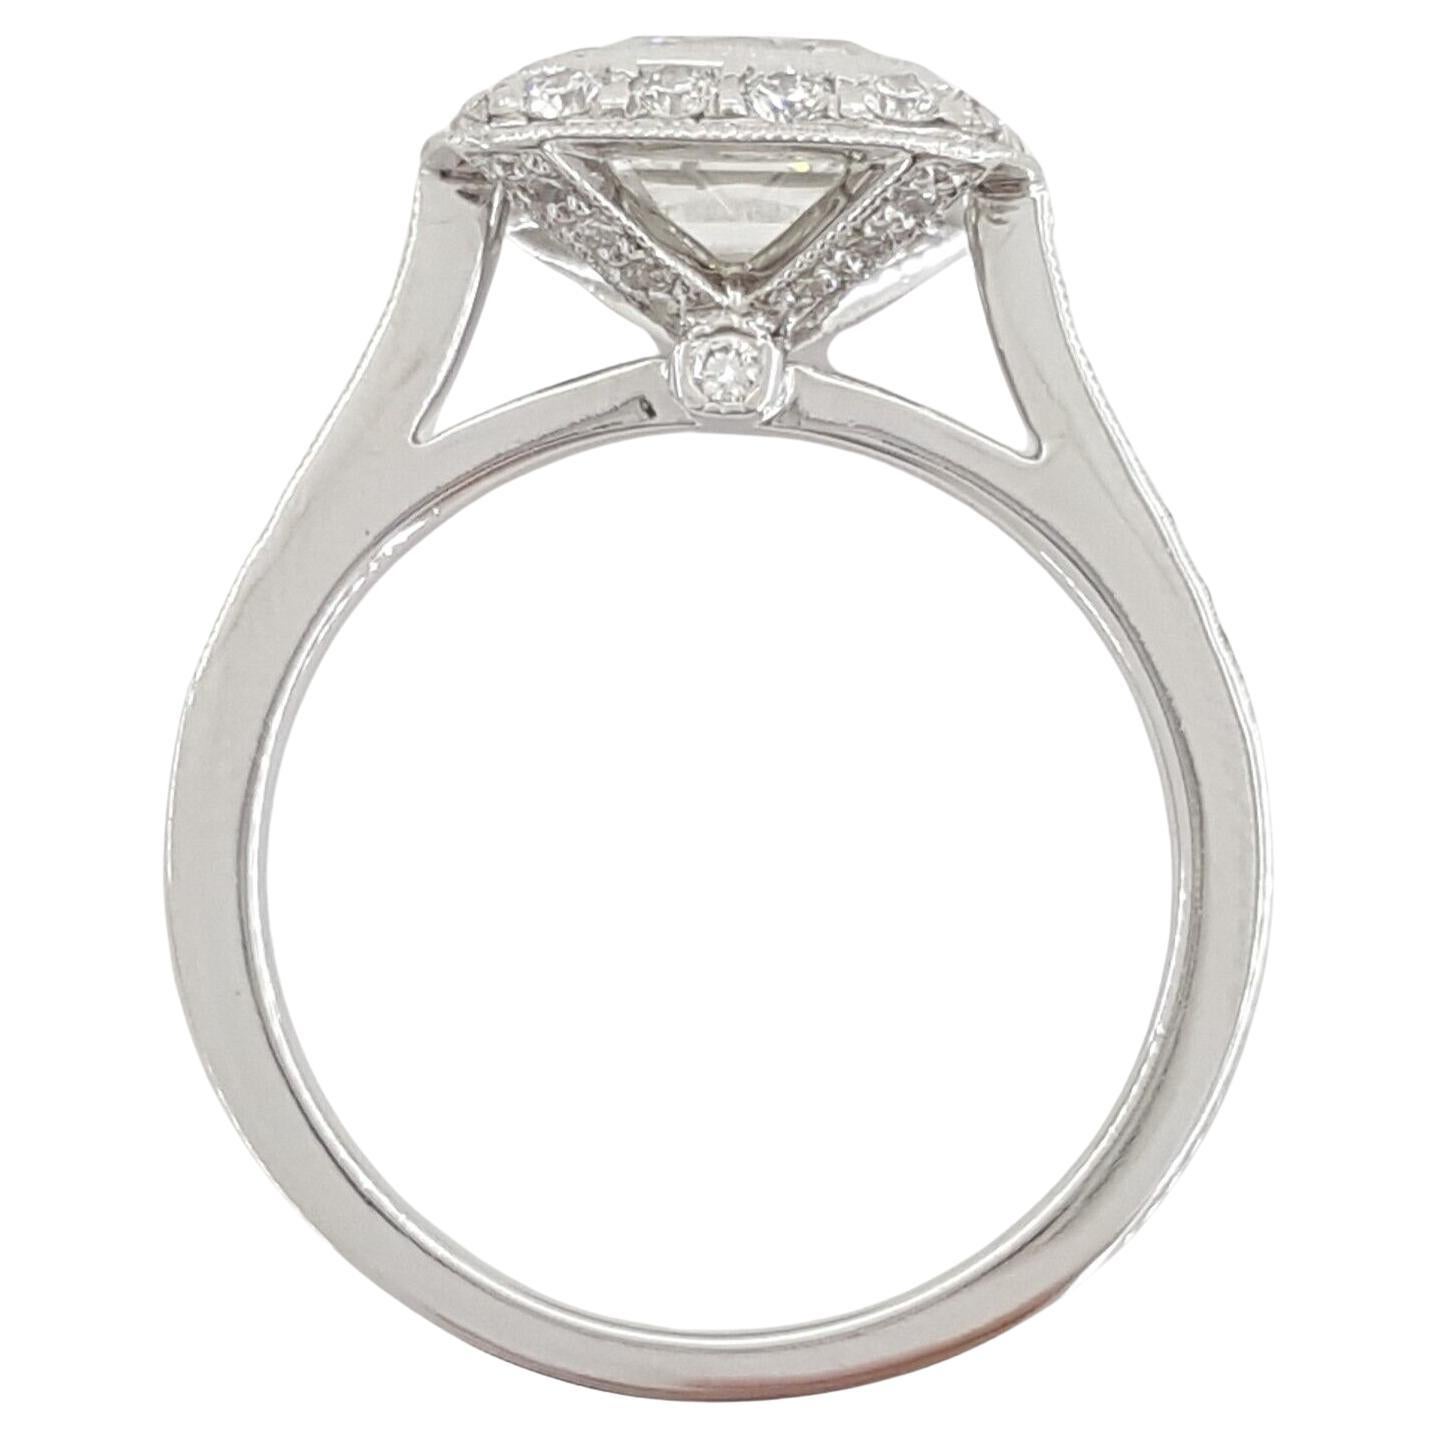 This exquisite Tiffany & Co. engagement ring is a true masterpiece, featuring a stunning Legacy Cushion Brilliant Cut Diamond at its center. Here are the details that make this ring a symbol of enduring elegance:

Center Stone: The ring showcases a